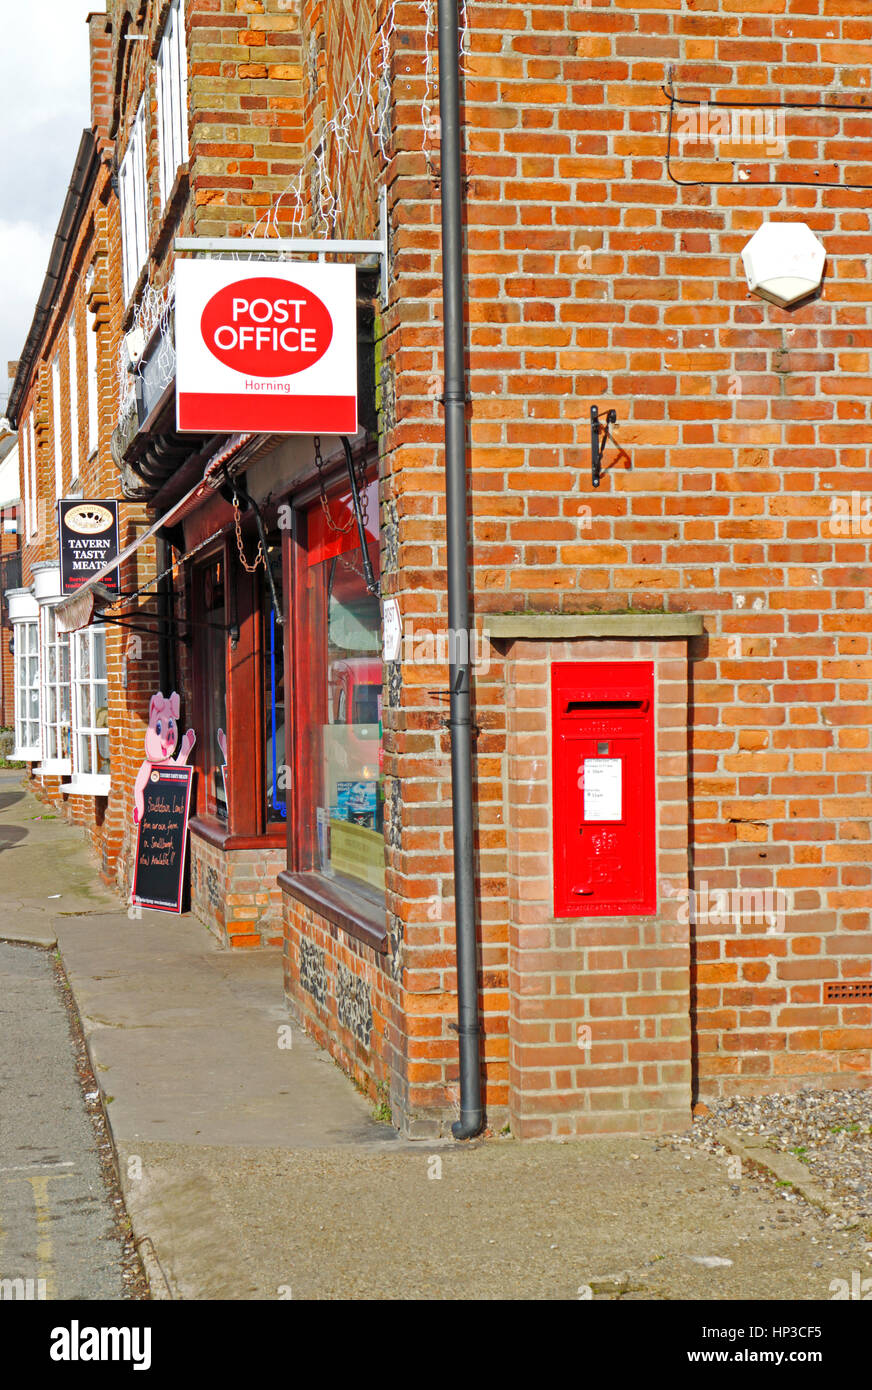 Post Office sign and letterbox in the village of Horning, Norfolk ...